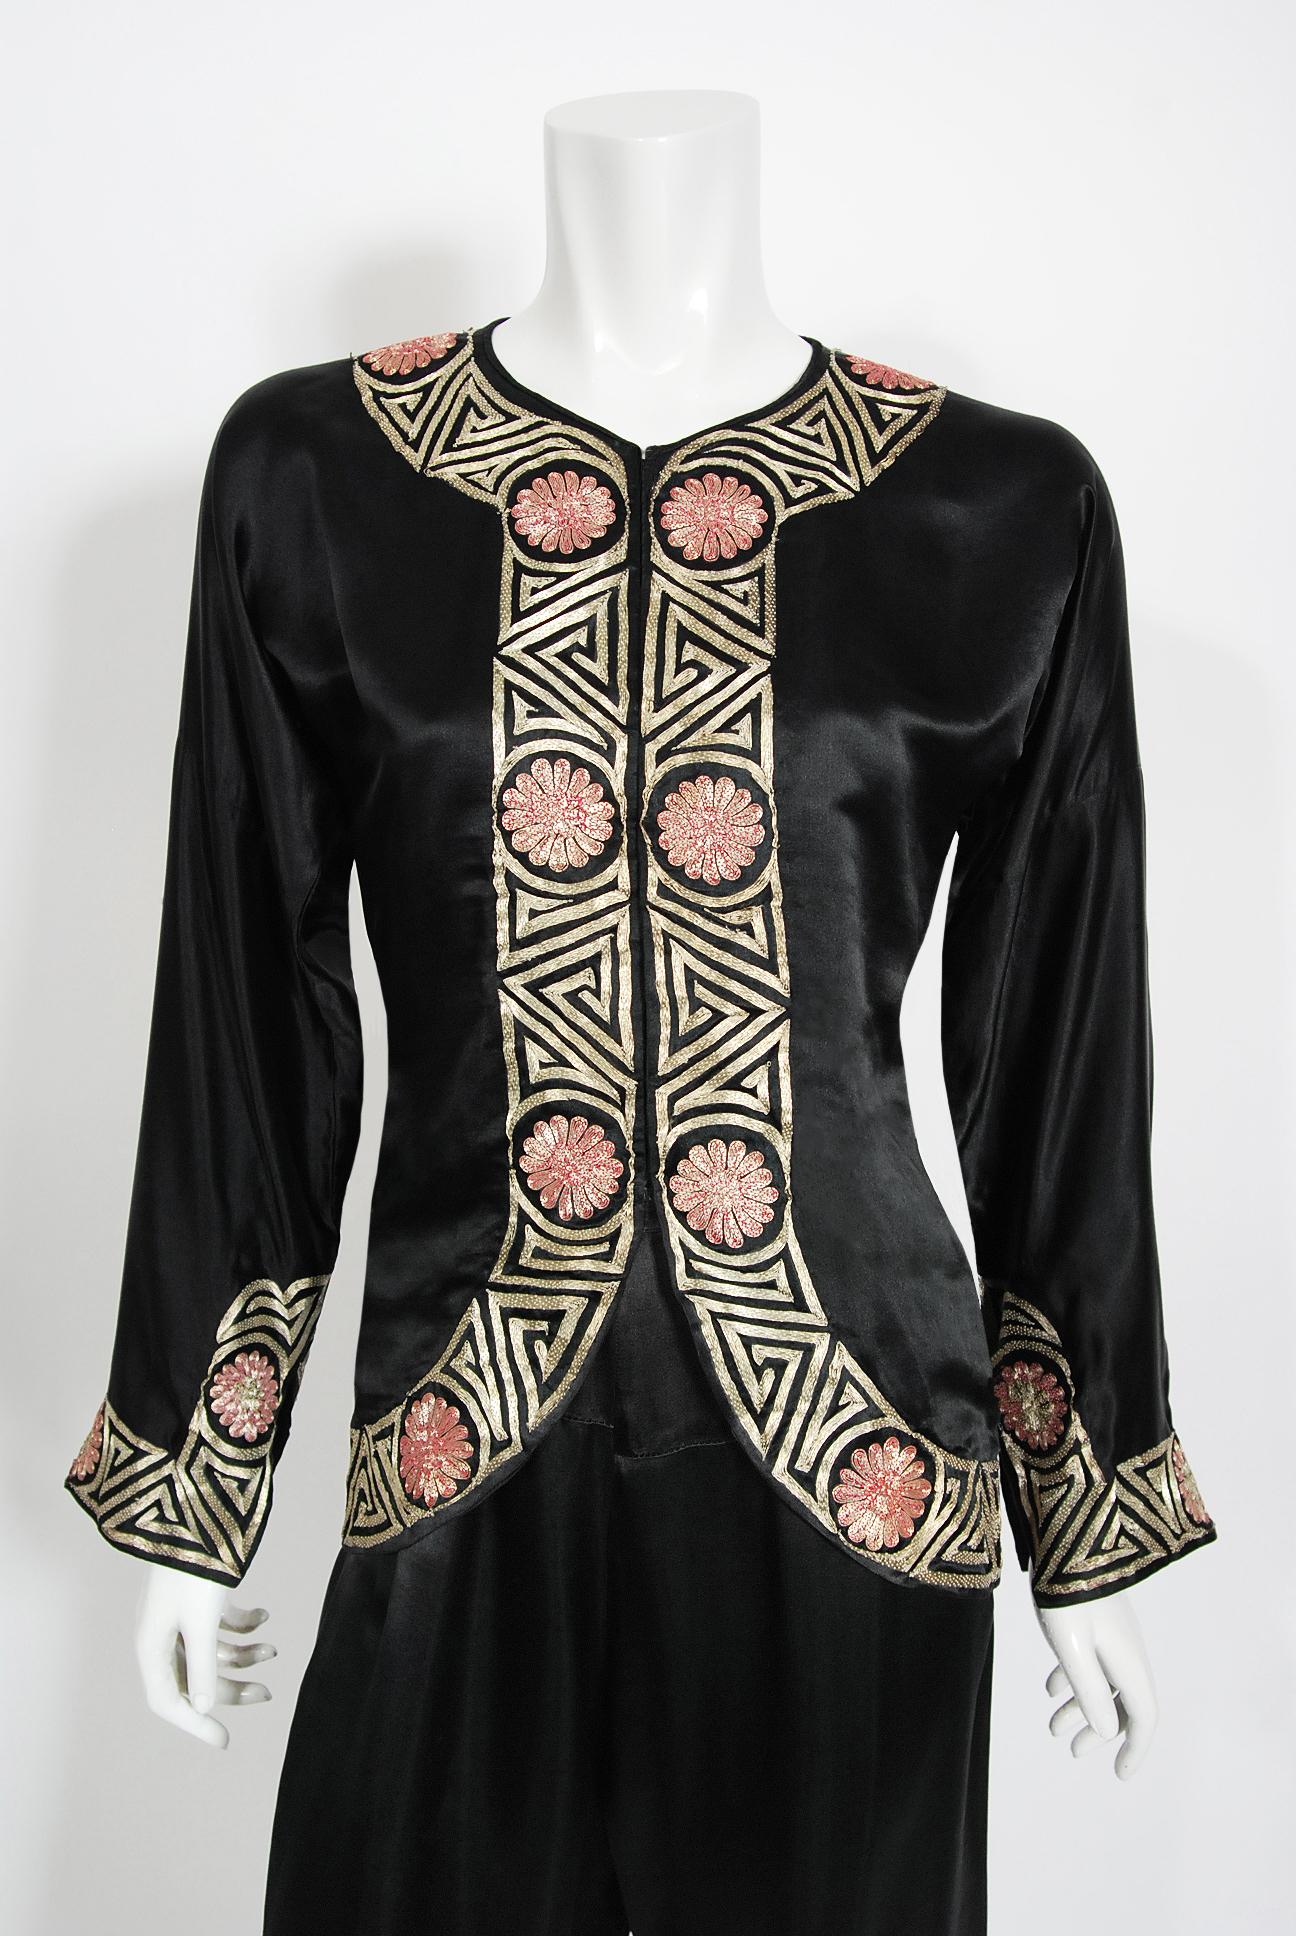 A truly exceptional embroidered black silk lounge ensemble dating back to the late 1920's-early 1930's time period. The fabric itself is a masterpiece; rare metallic gold Chinese couching embroidery on the softest black silk. I adore the pale-pink